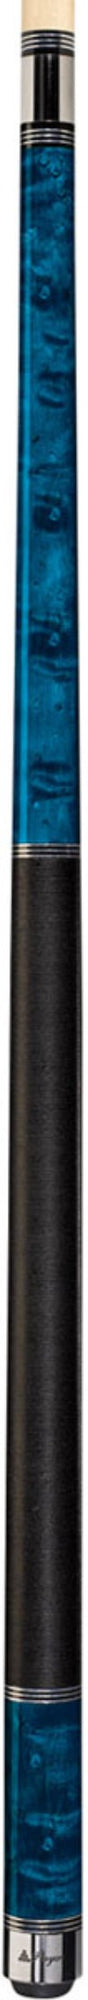 Players Players C-955 Pool Cue Pool Cue